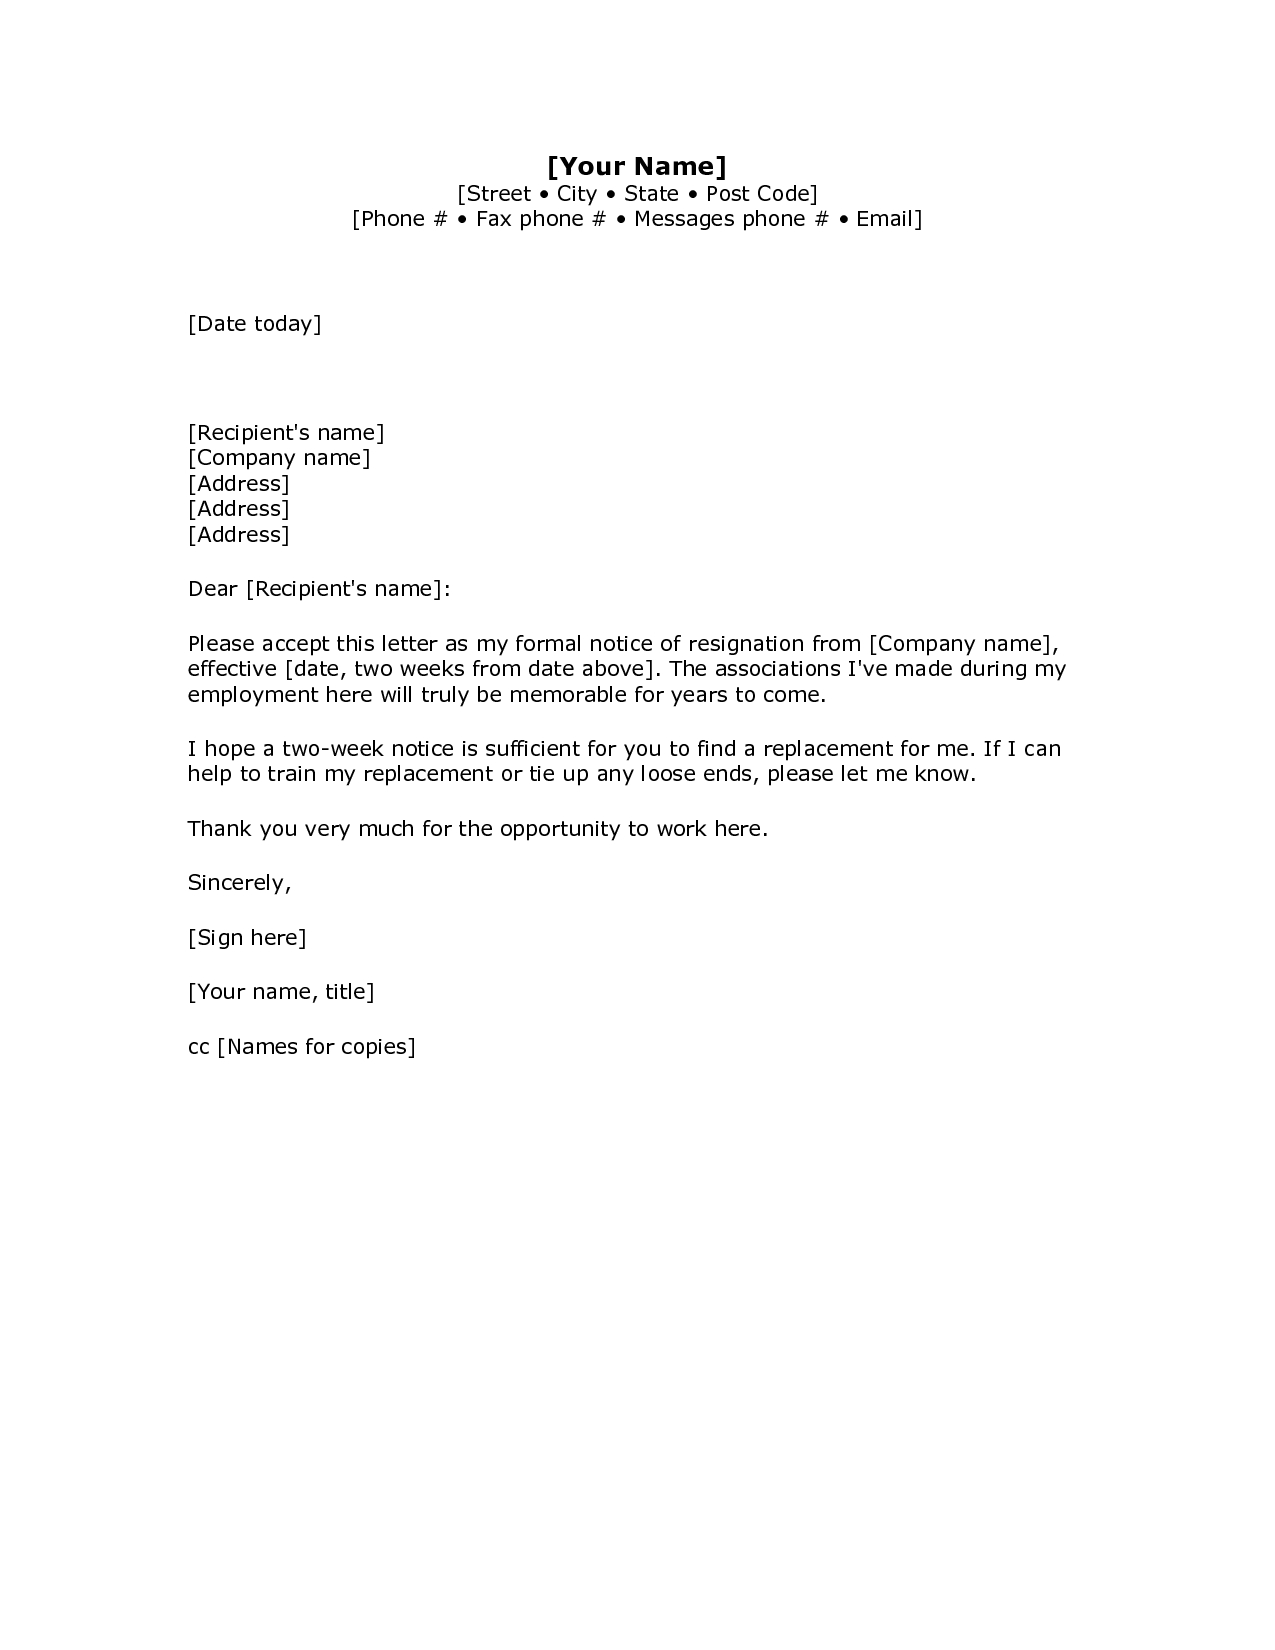 i quit letter template example-2 Weeks Notice Letter Resignation Letter Week Notice Words HDWriting A Letter Resignation Email Letter Sample 2-j